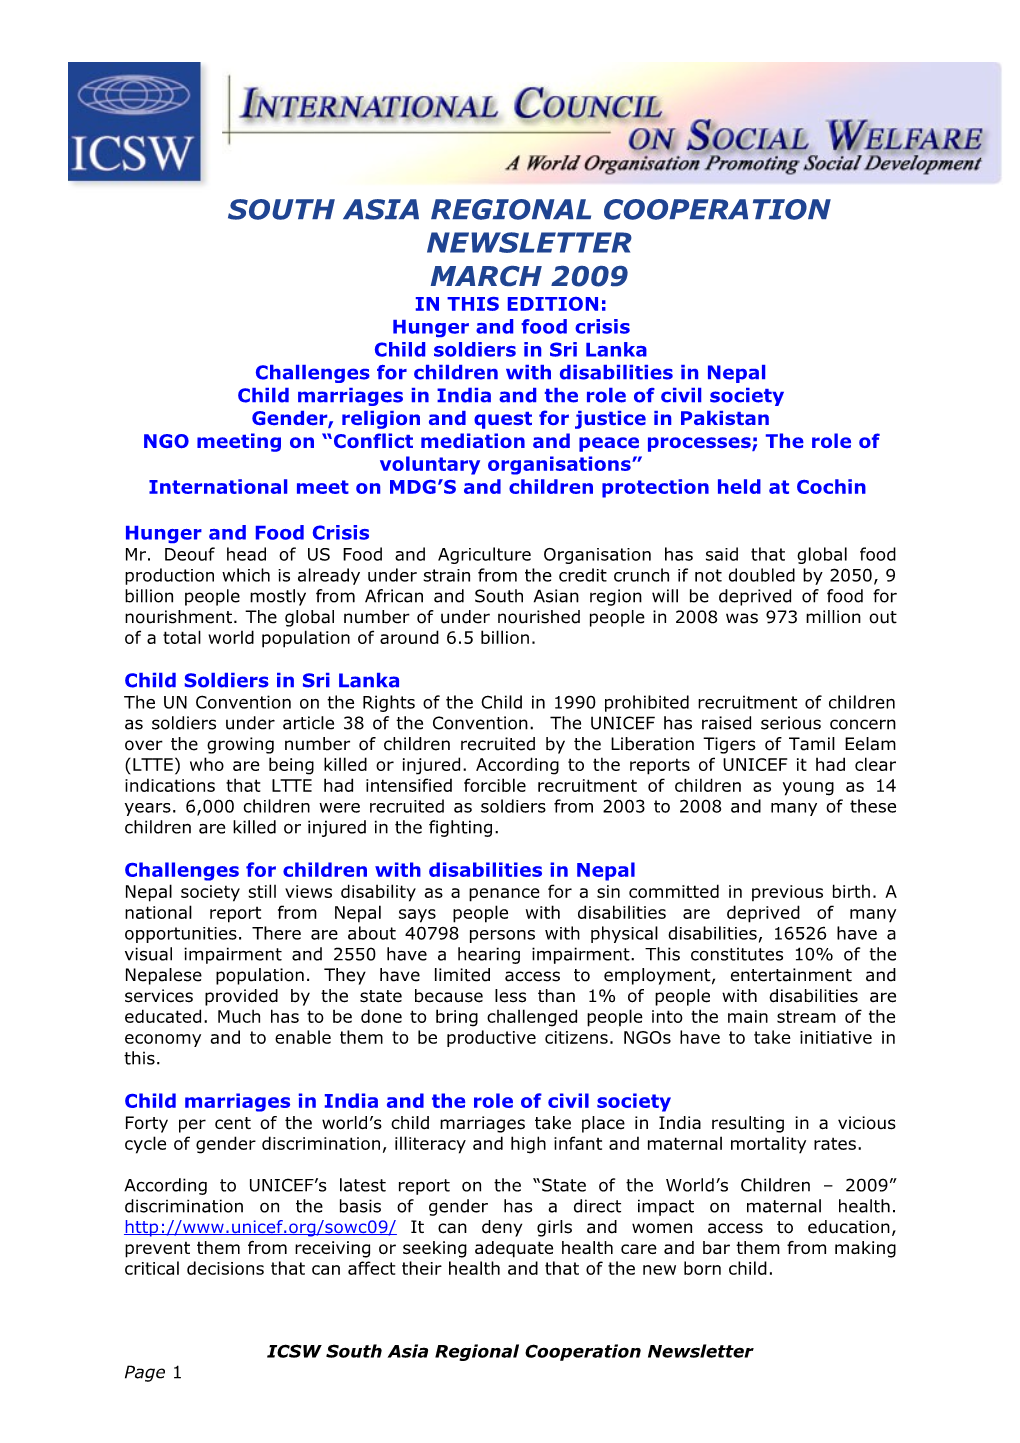 South Asia Regional Cooperation Newsletter